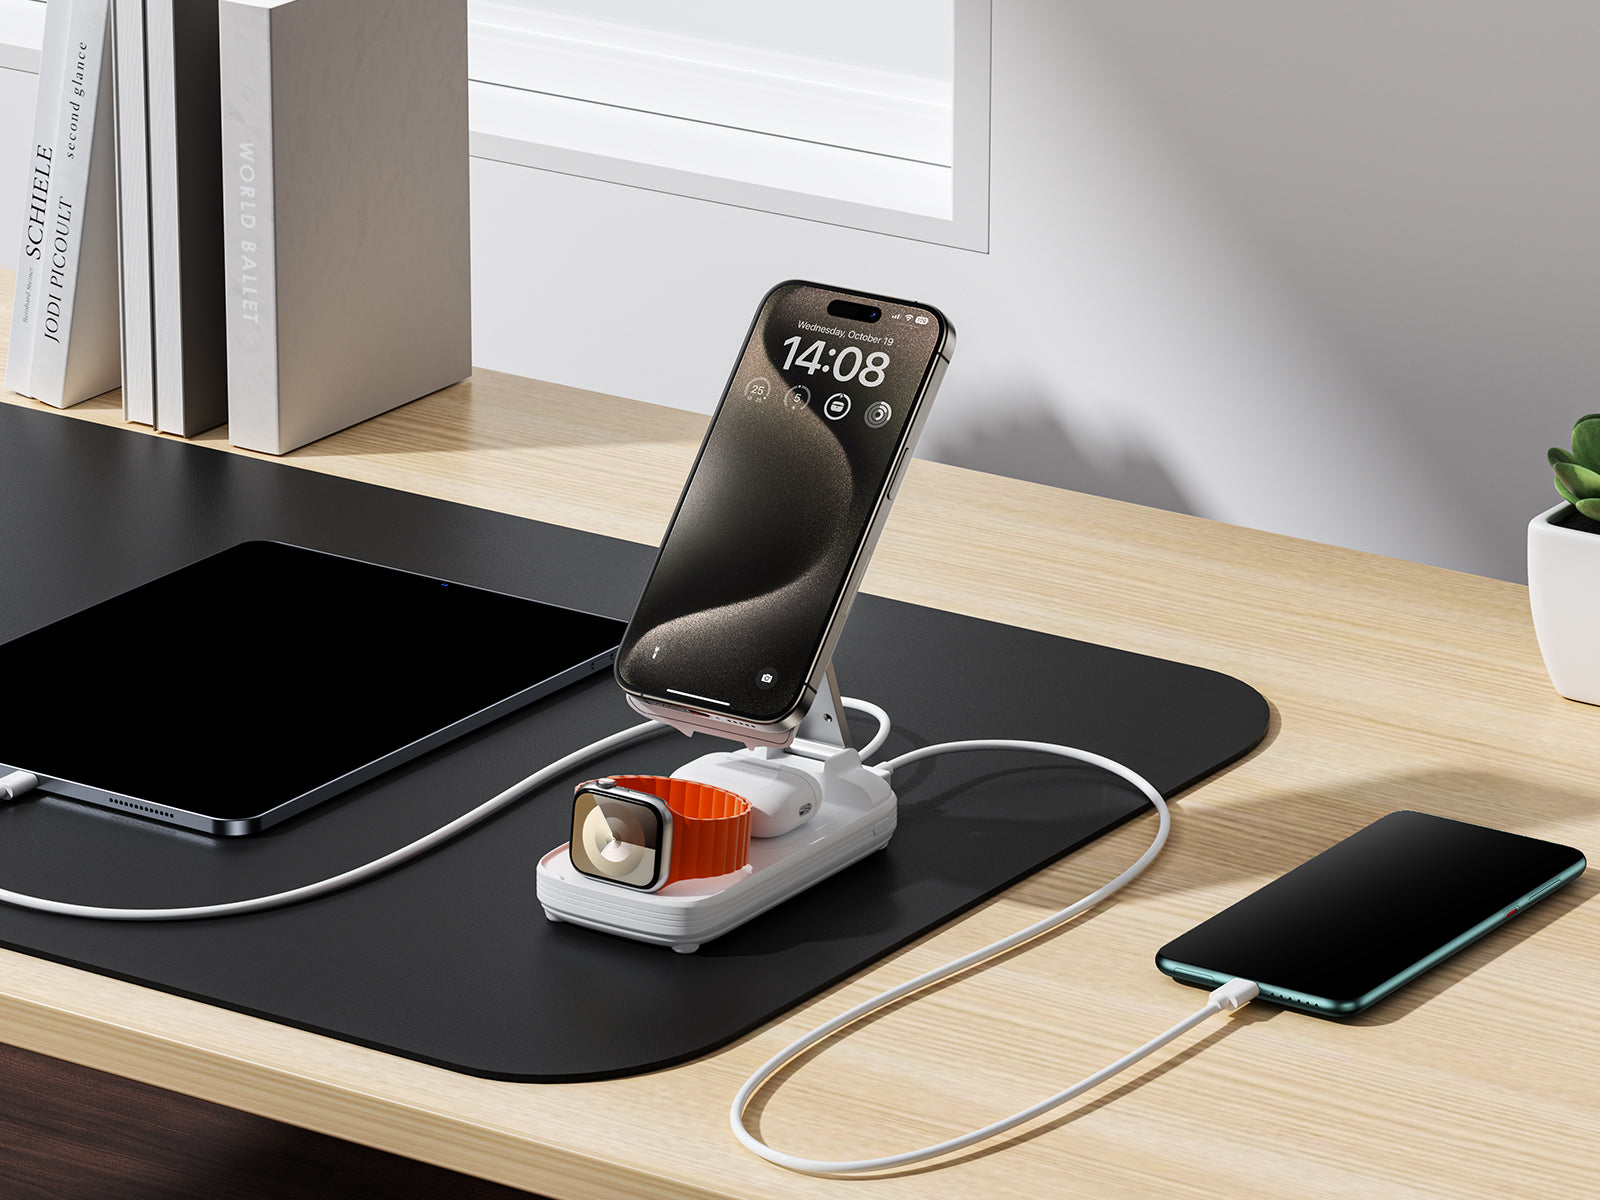 Modern workspace featuring multiple devices charged by a power bank